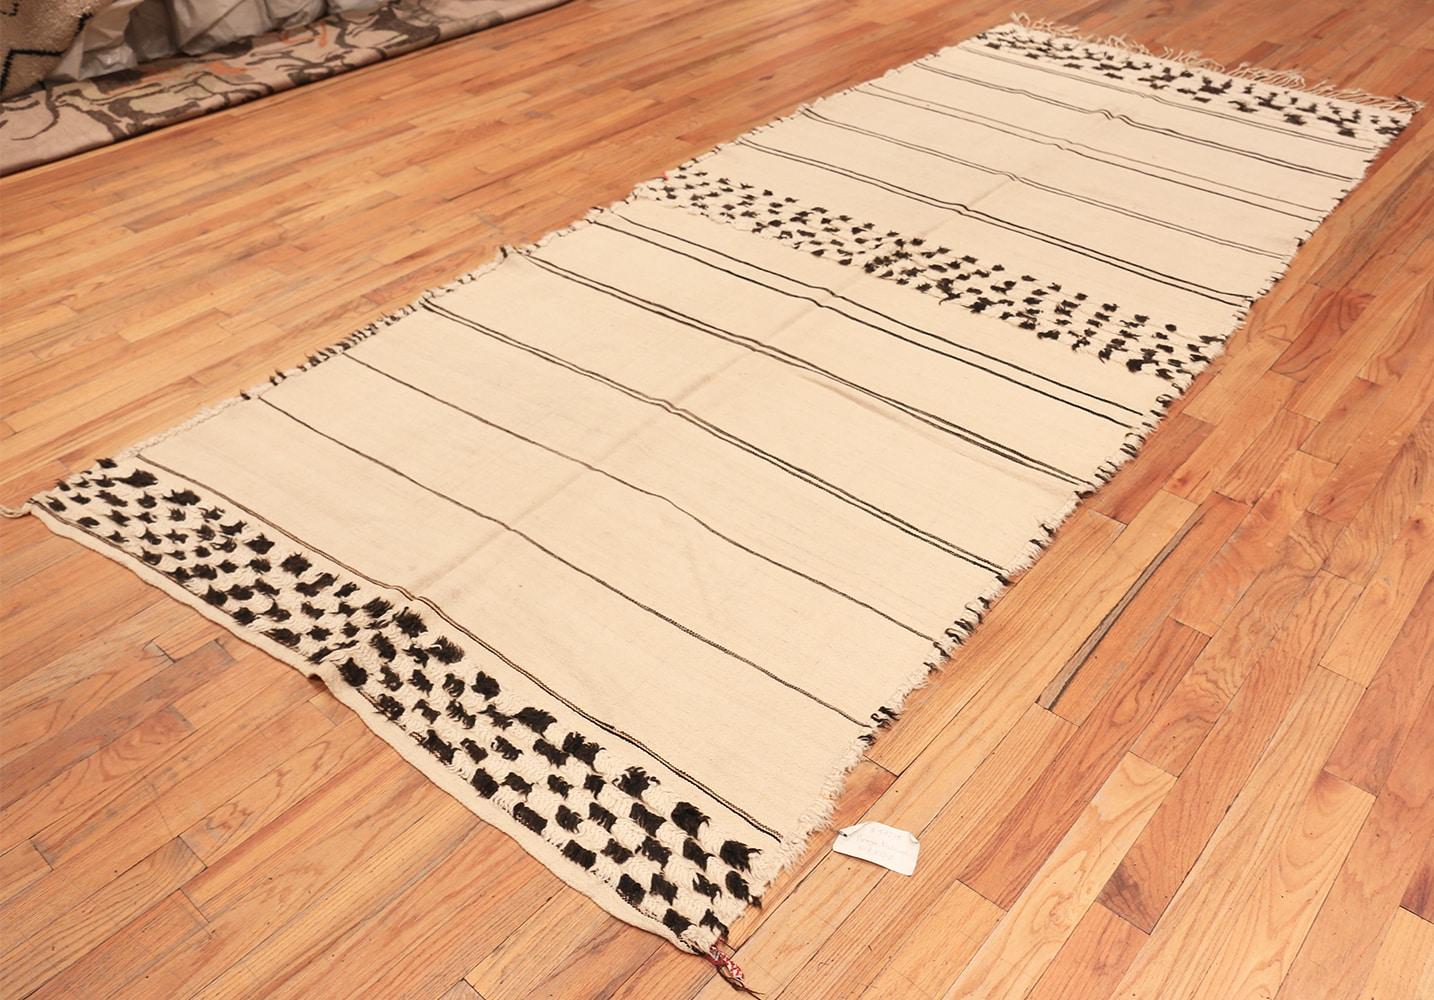 Magnificently soft and tribal ivory and black vintage Moroccan rug, origin: Morocco, circa mid-20th century. Size: 5 ft 7 in x 12 ft 2 in (1.7 m x 3.71 m). This beautiful, simple rug is from mid-20th century Morocco, but it could just as easily have